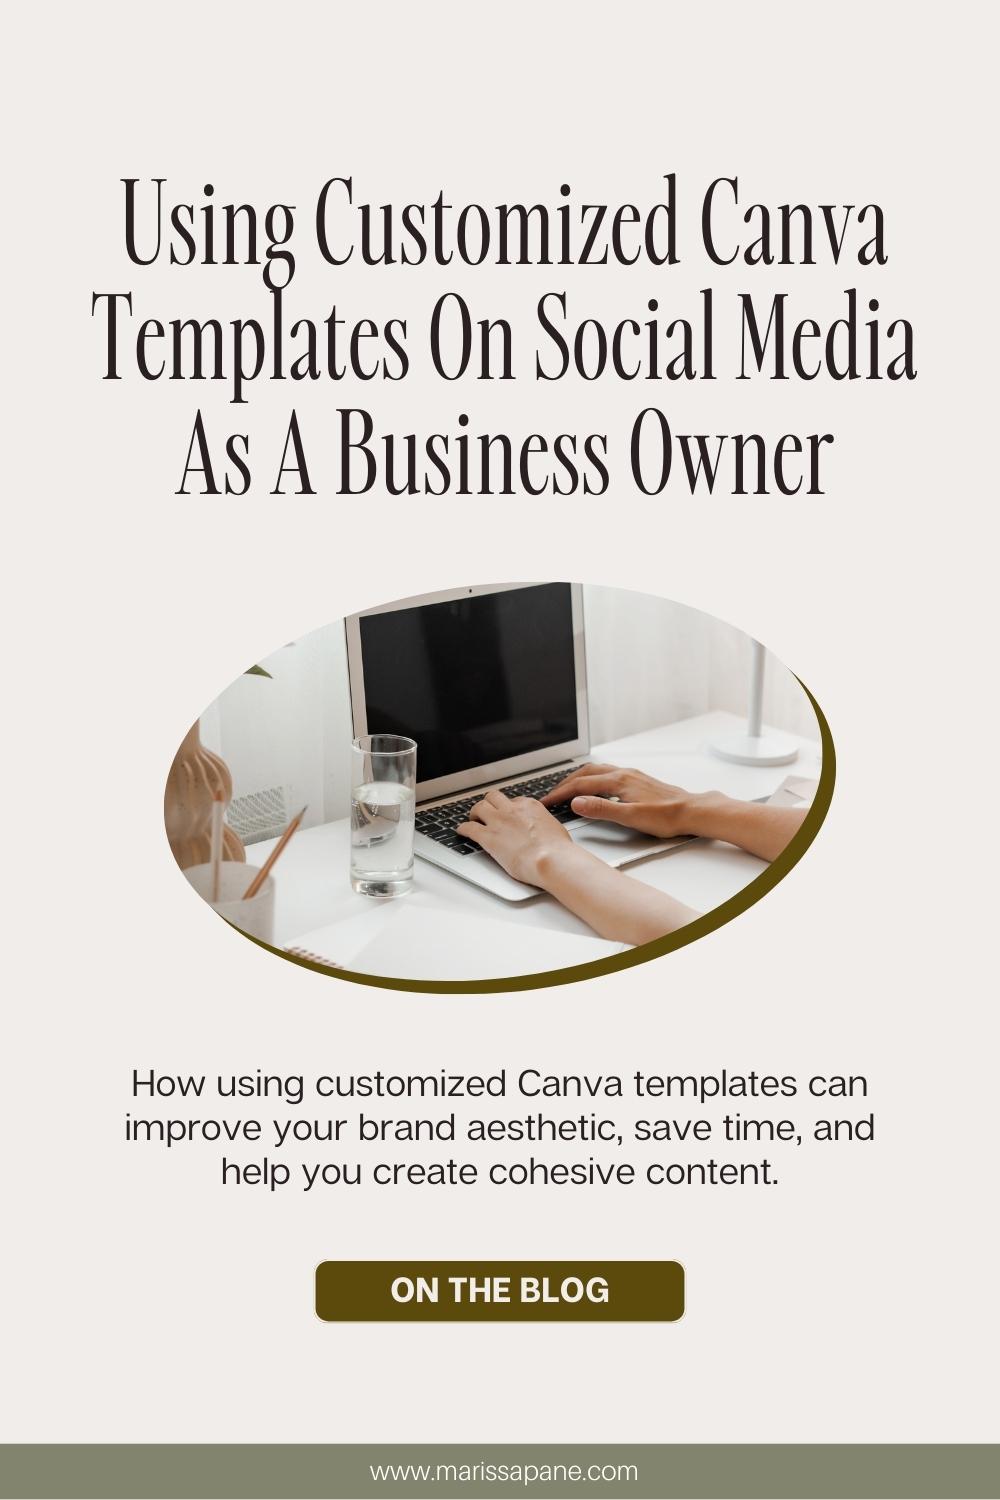 How using customized Canva templates can improve your brand aesthetic, save time, and help you create cohesive content.